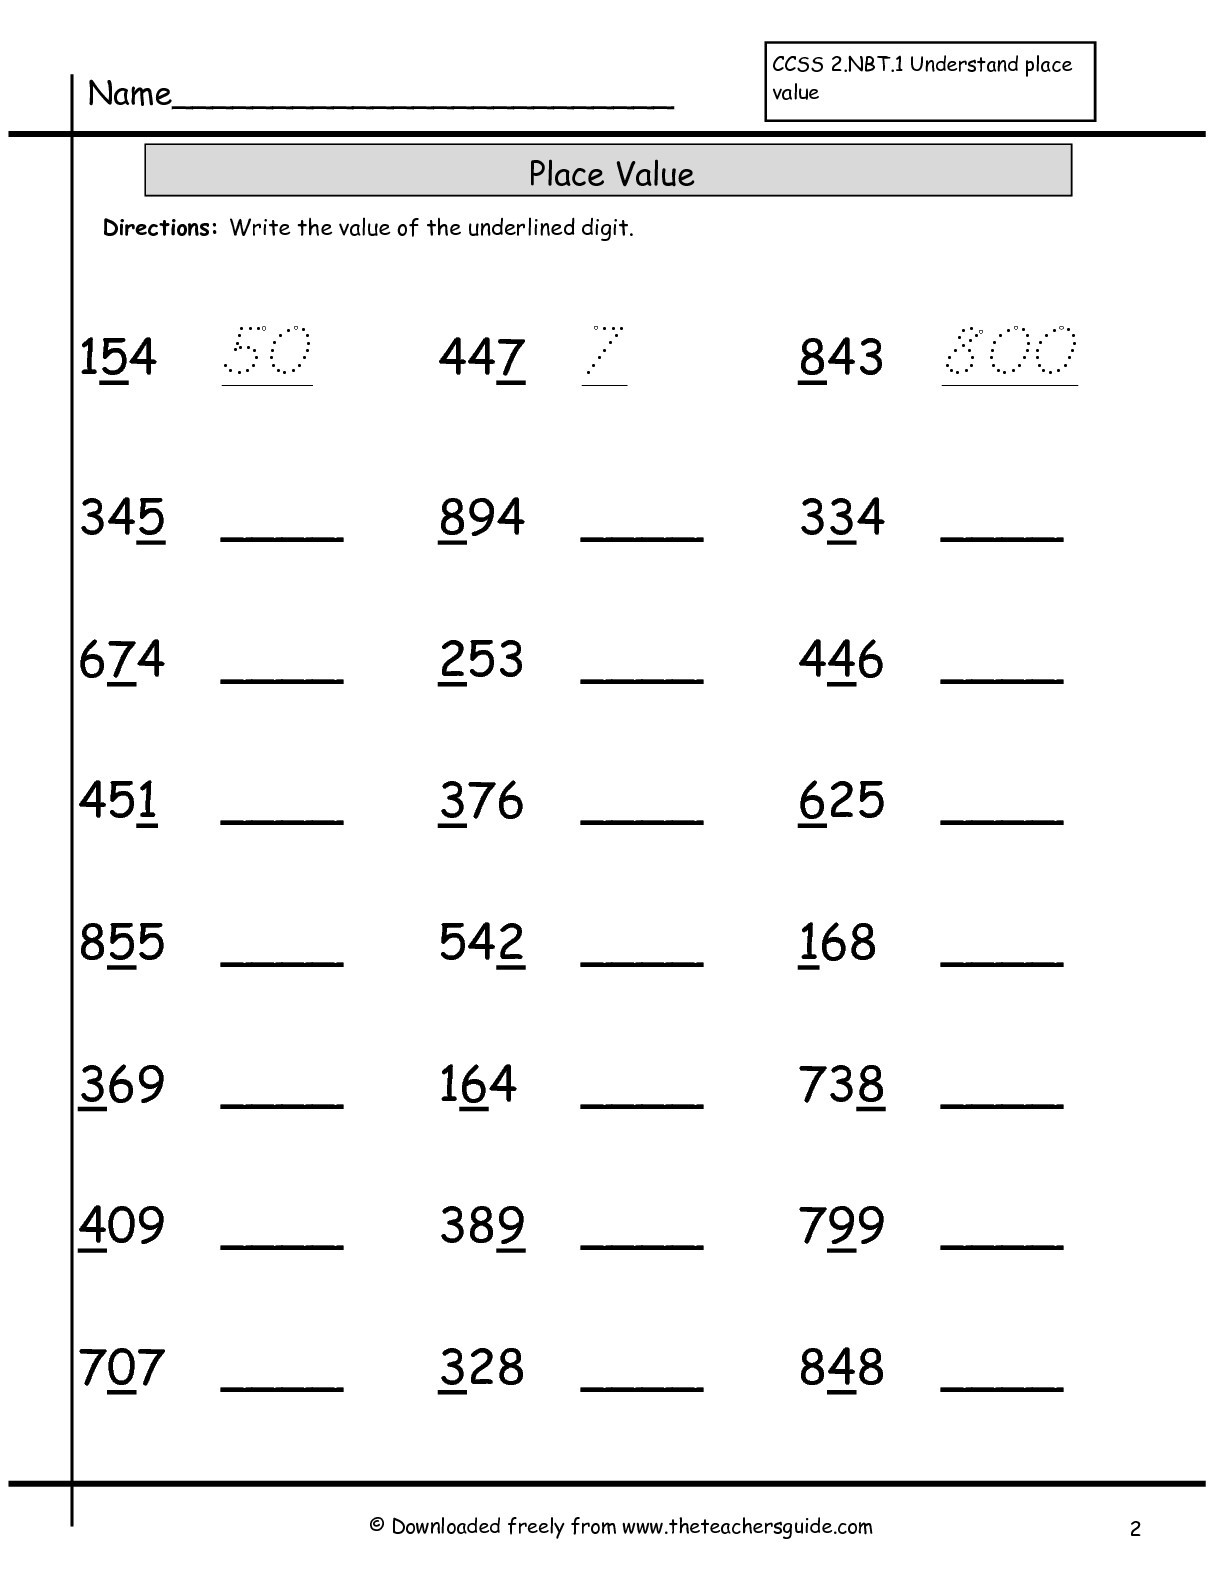 Place Value Worksheet 3rd Grade Mrs Garay S Place Value for Third Grade Lessons Tes Teach